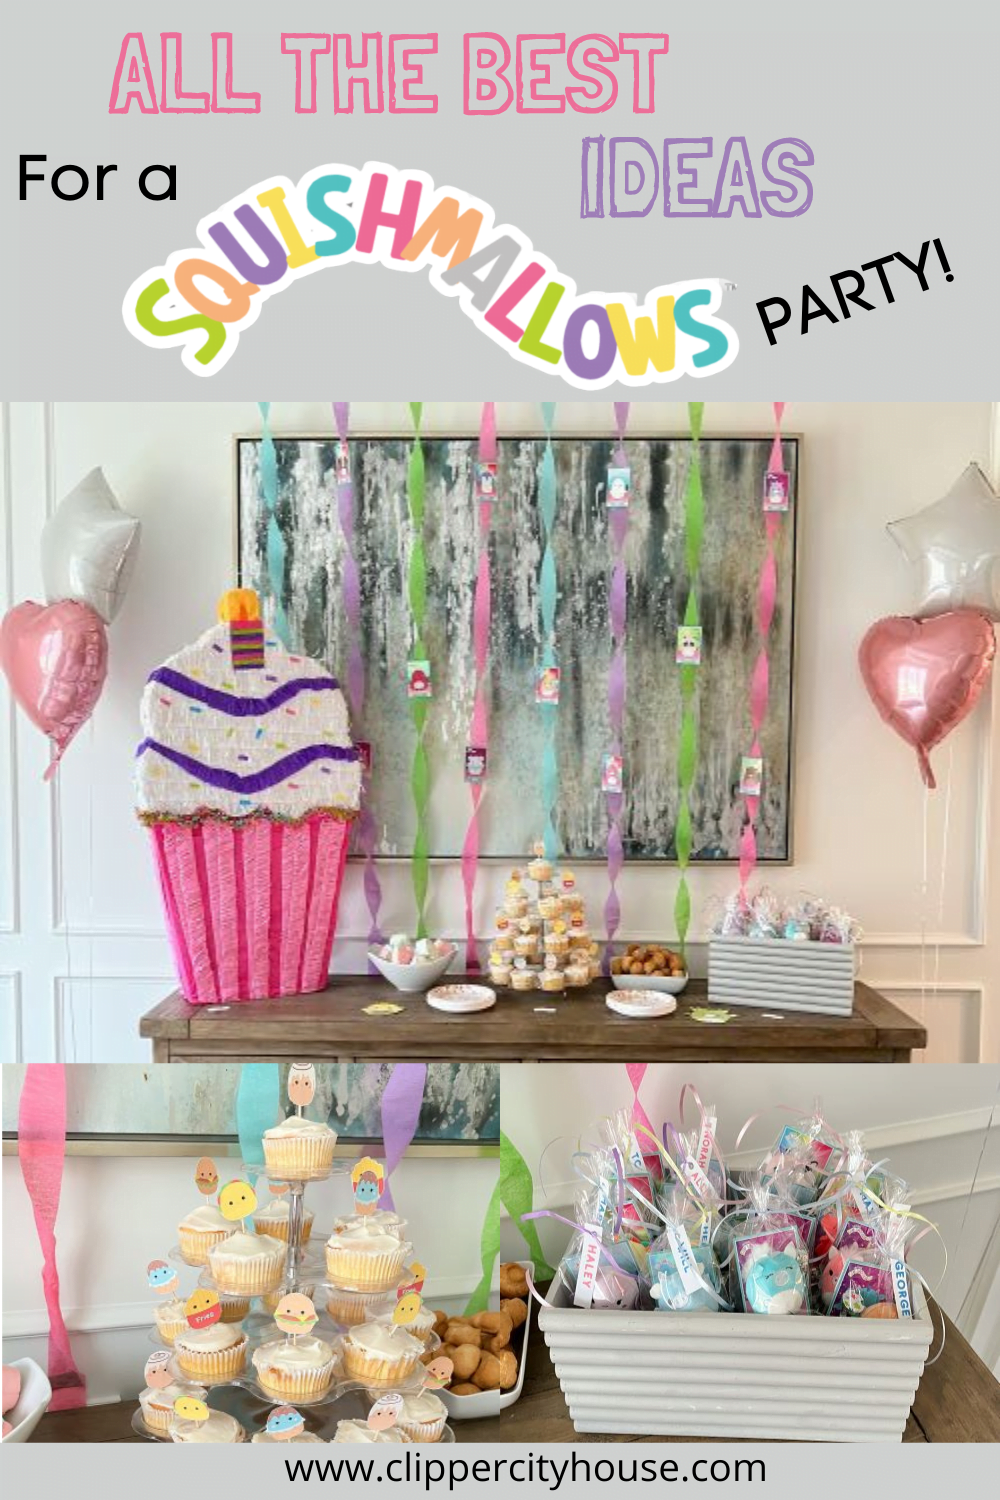 Squishmallows Party Paper Cups 8 piece, Party Supplies